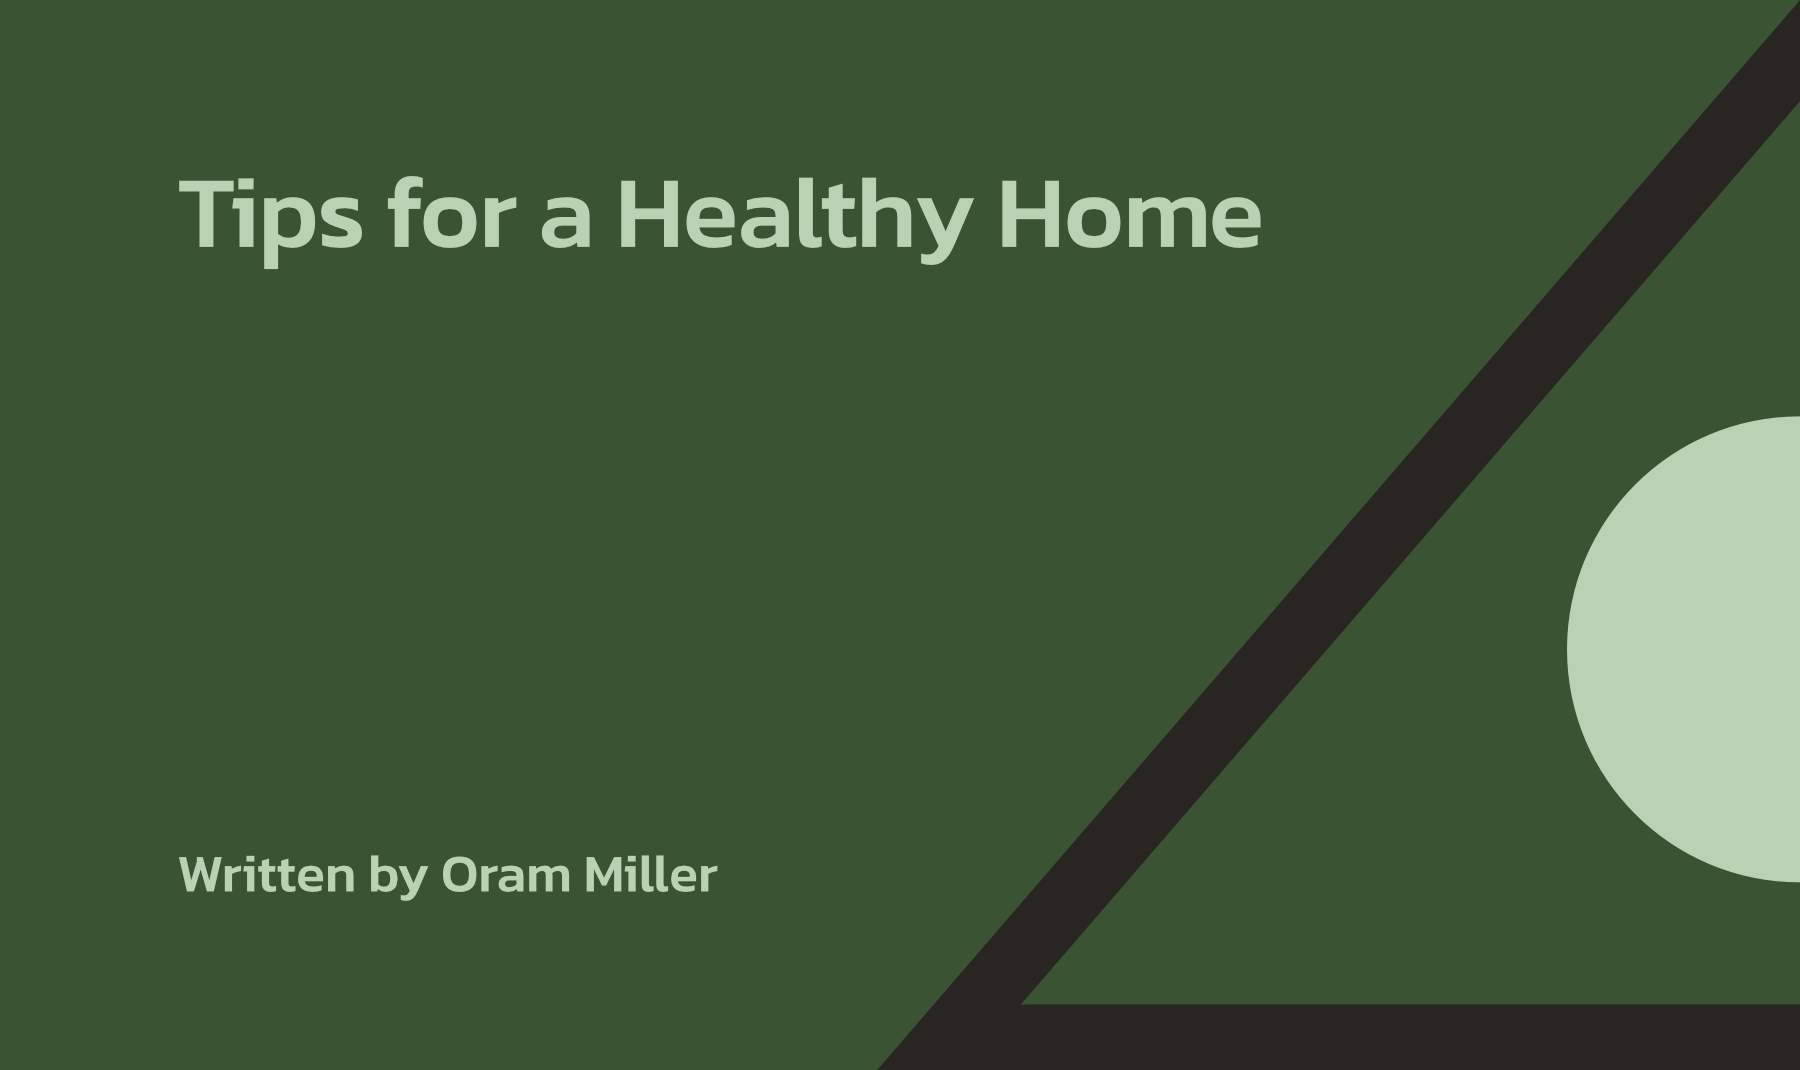 Tips for a Healthy Home